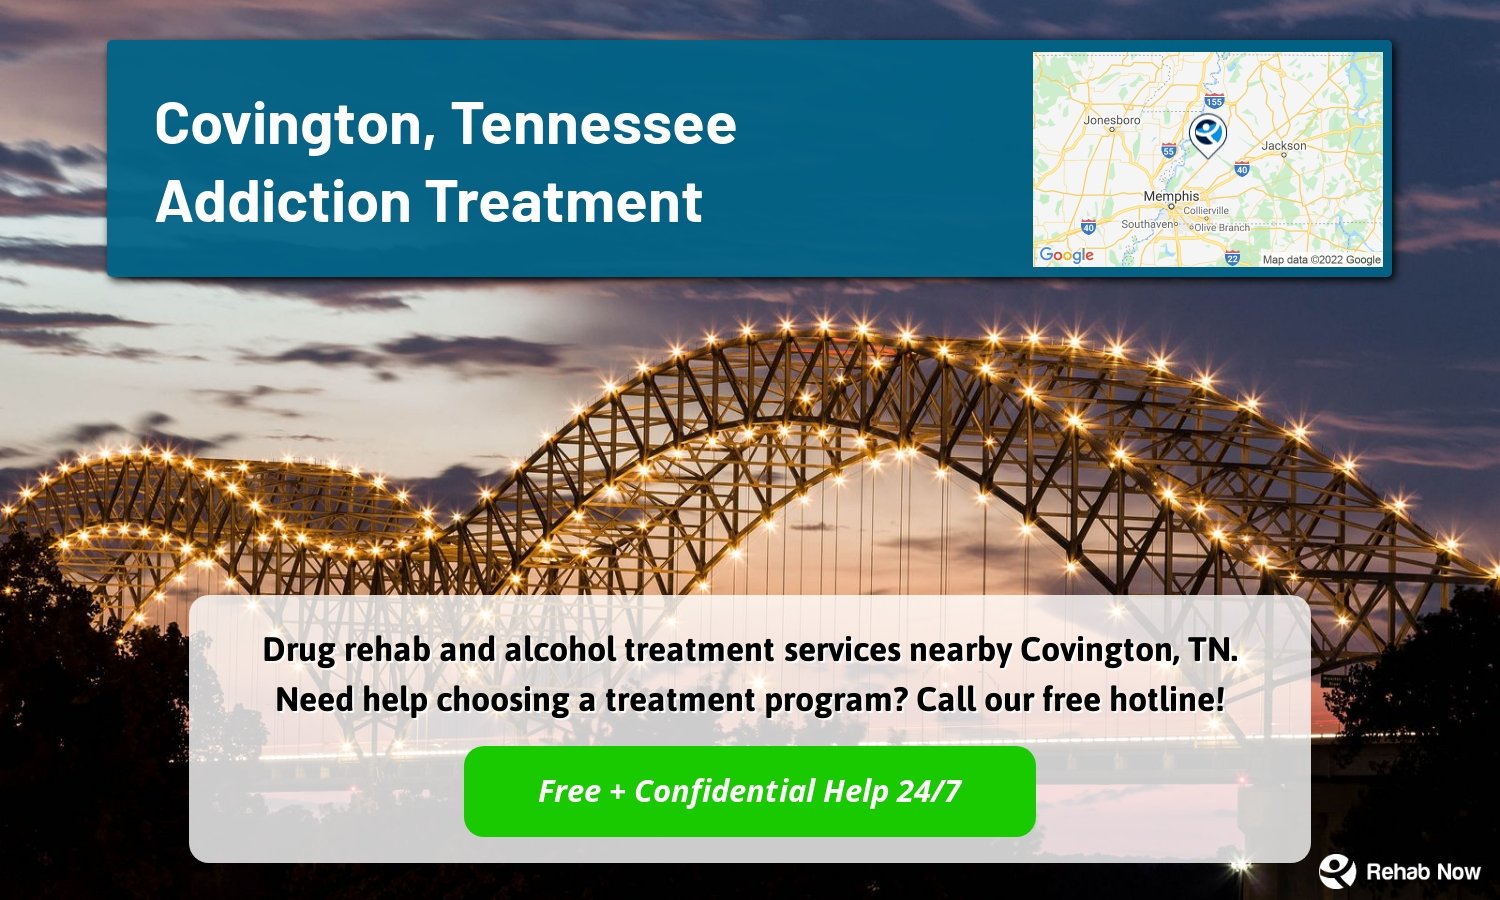 Drug rehab and alcohol treatment services nearby Covington, TN. Need help choosing a treatment program? Call our free hotline!